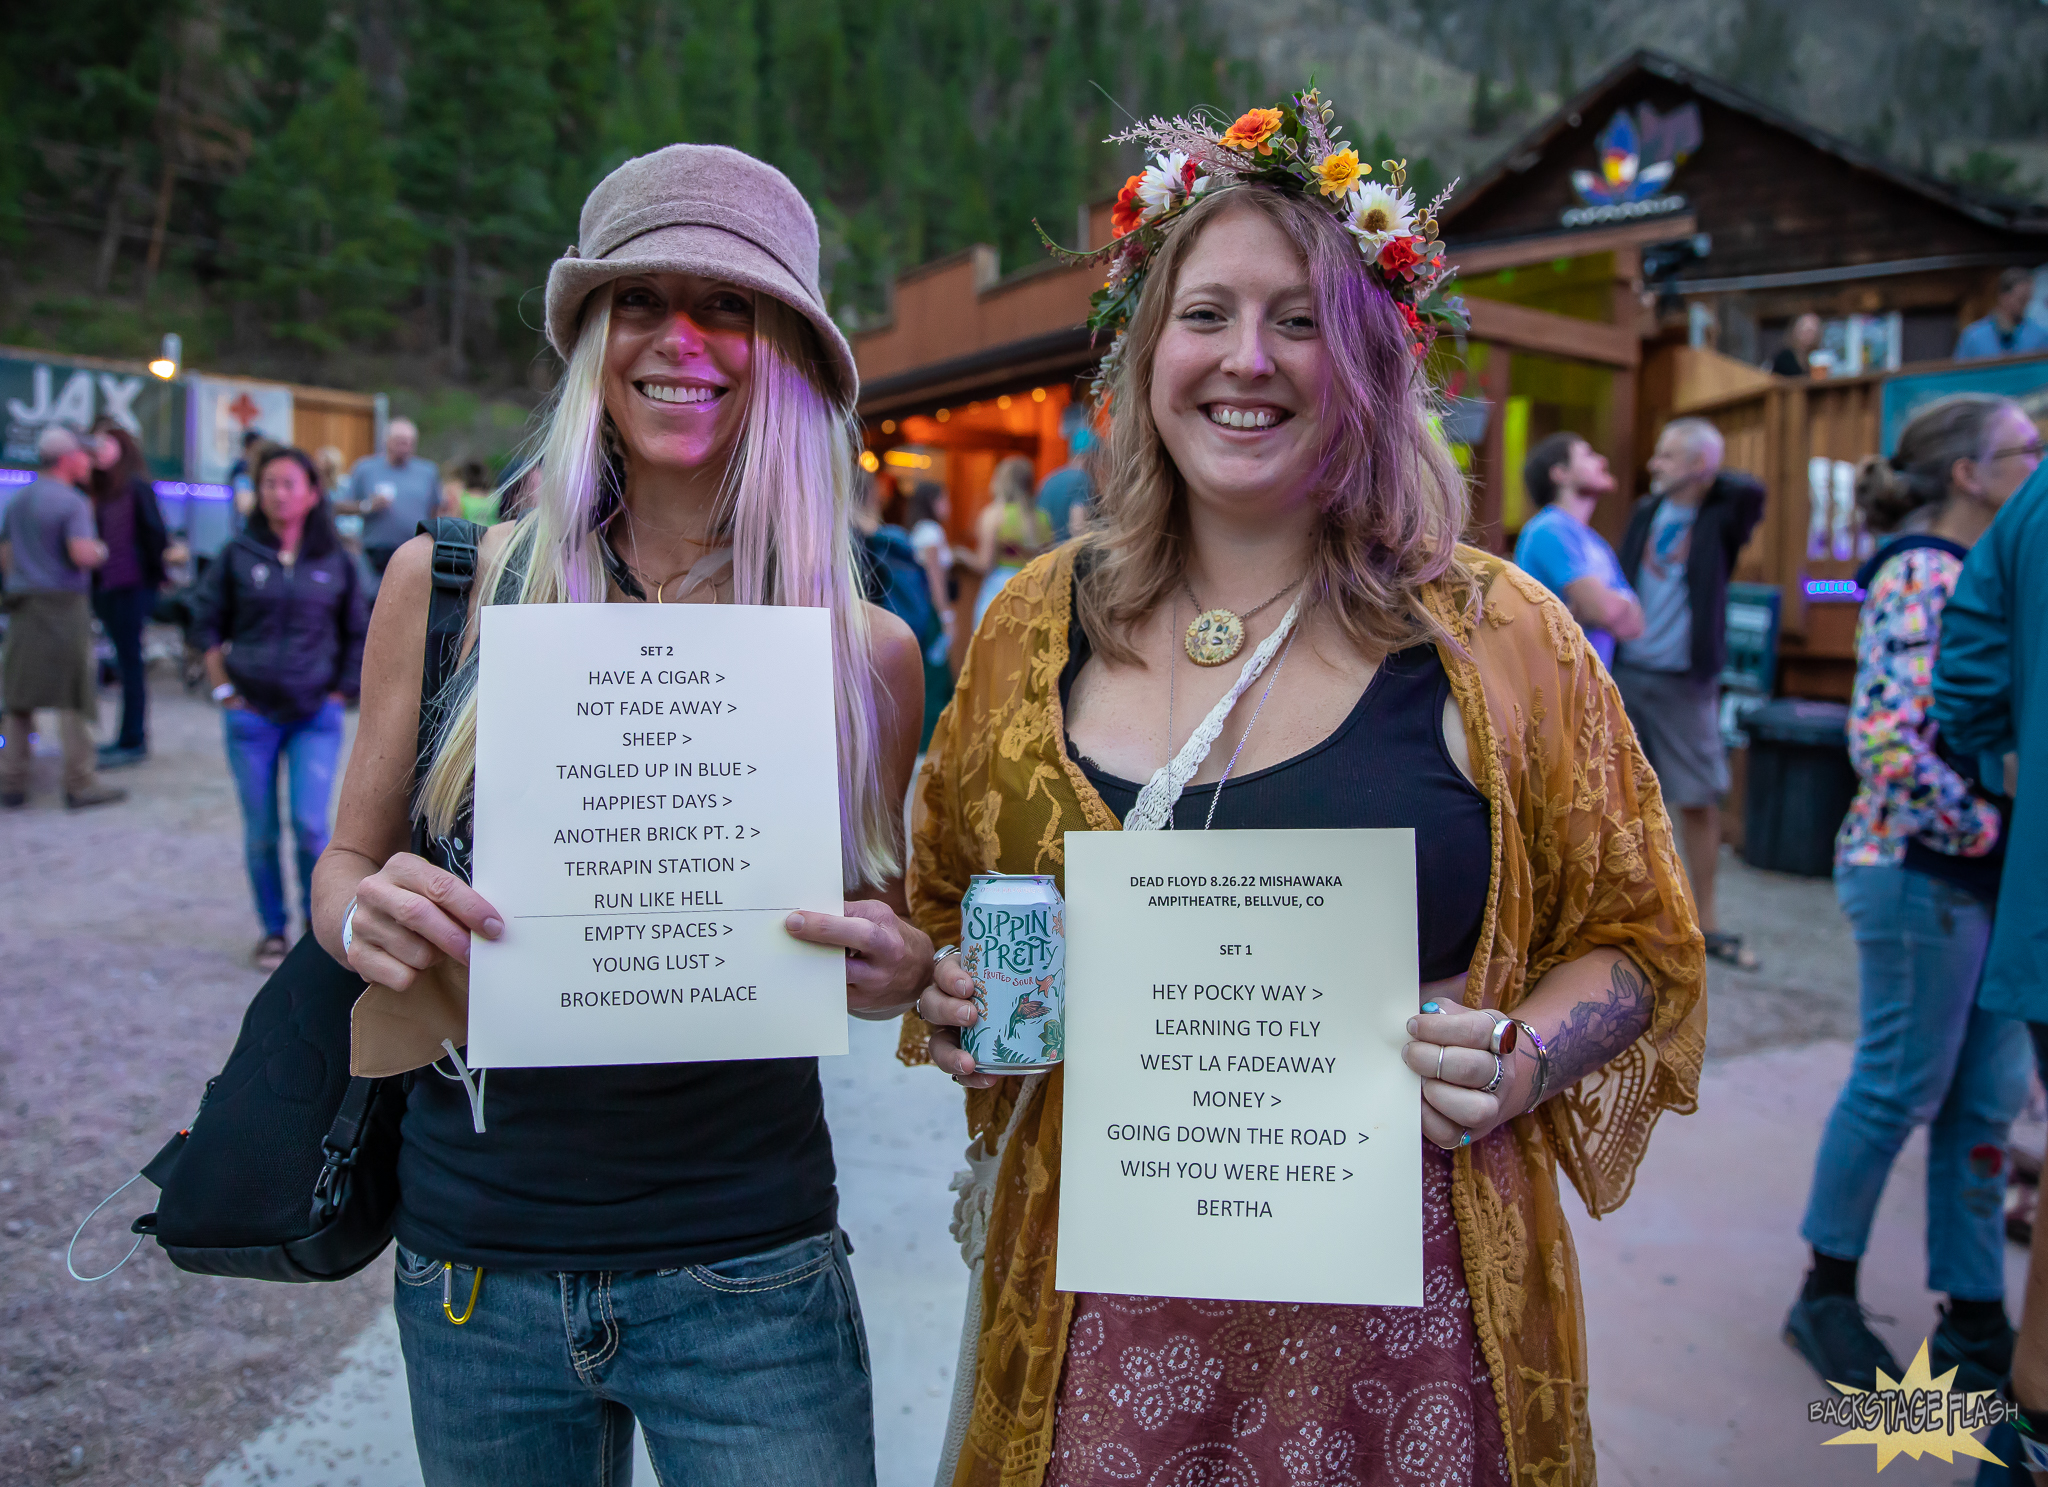 Dead Floyd fans - Kimber Korsgaard and Poetry Green at The Mish